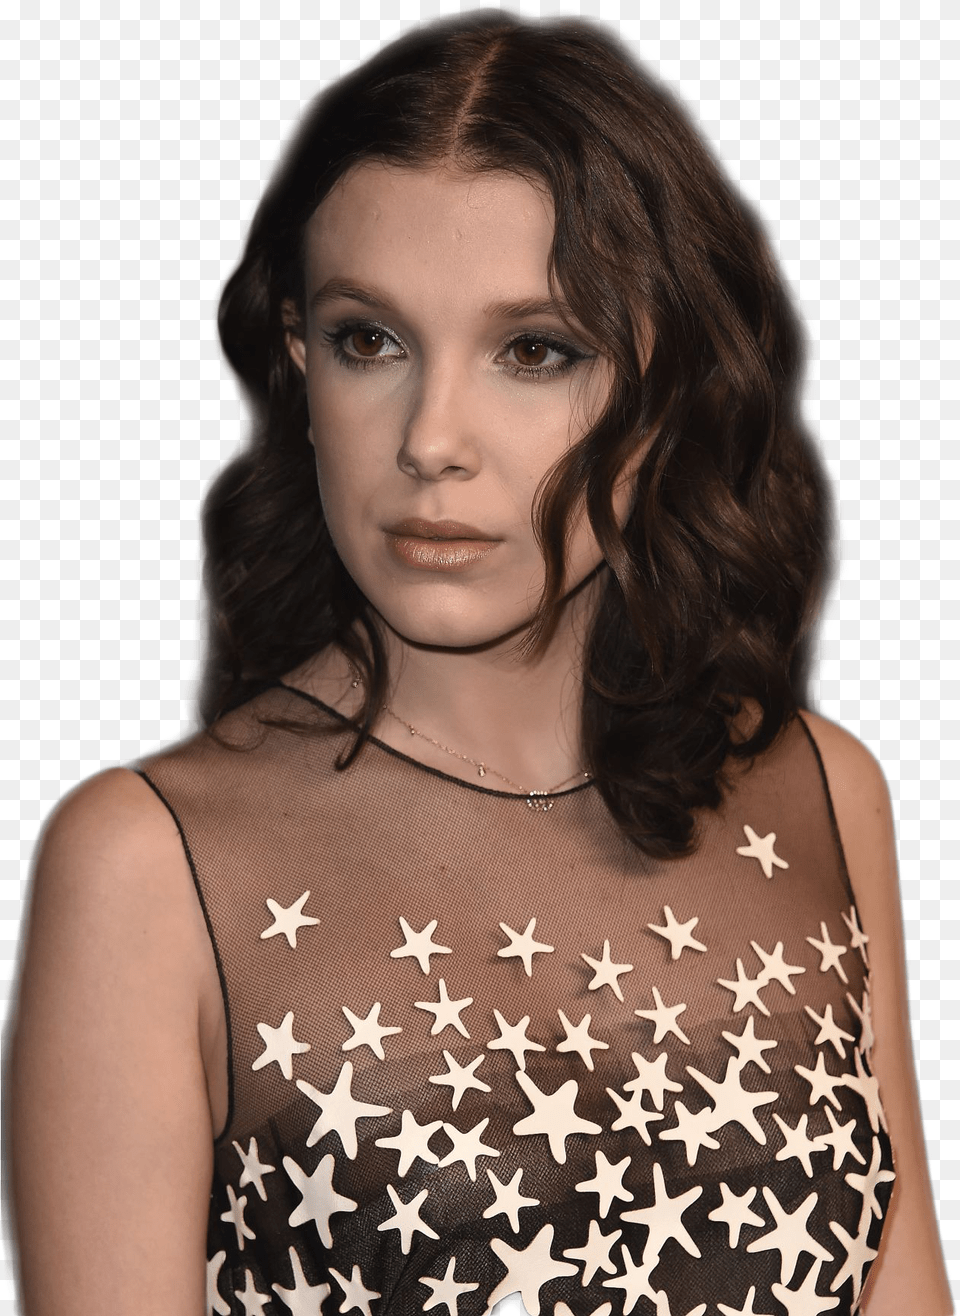 Millie Bobby Brown In Transparent, Accessories, Portrait, Photography, Person Png